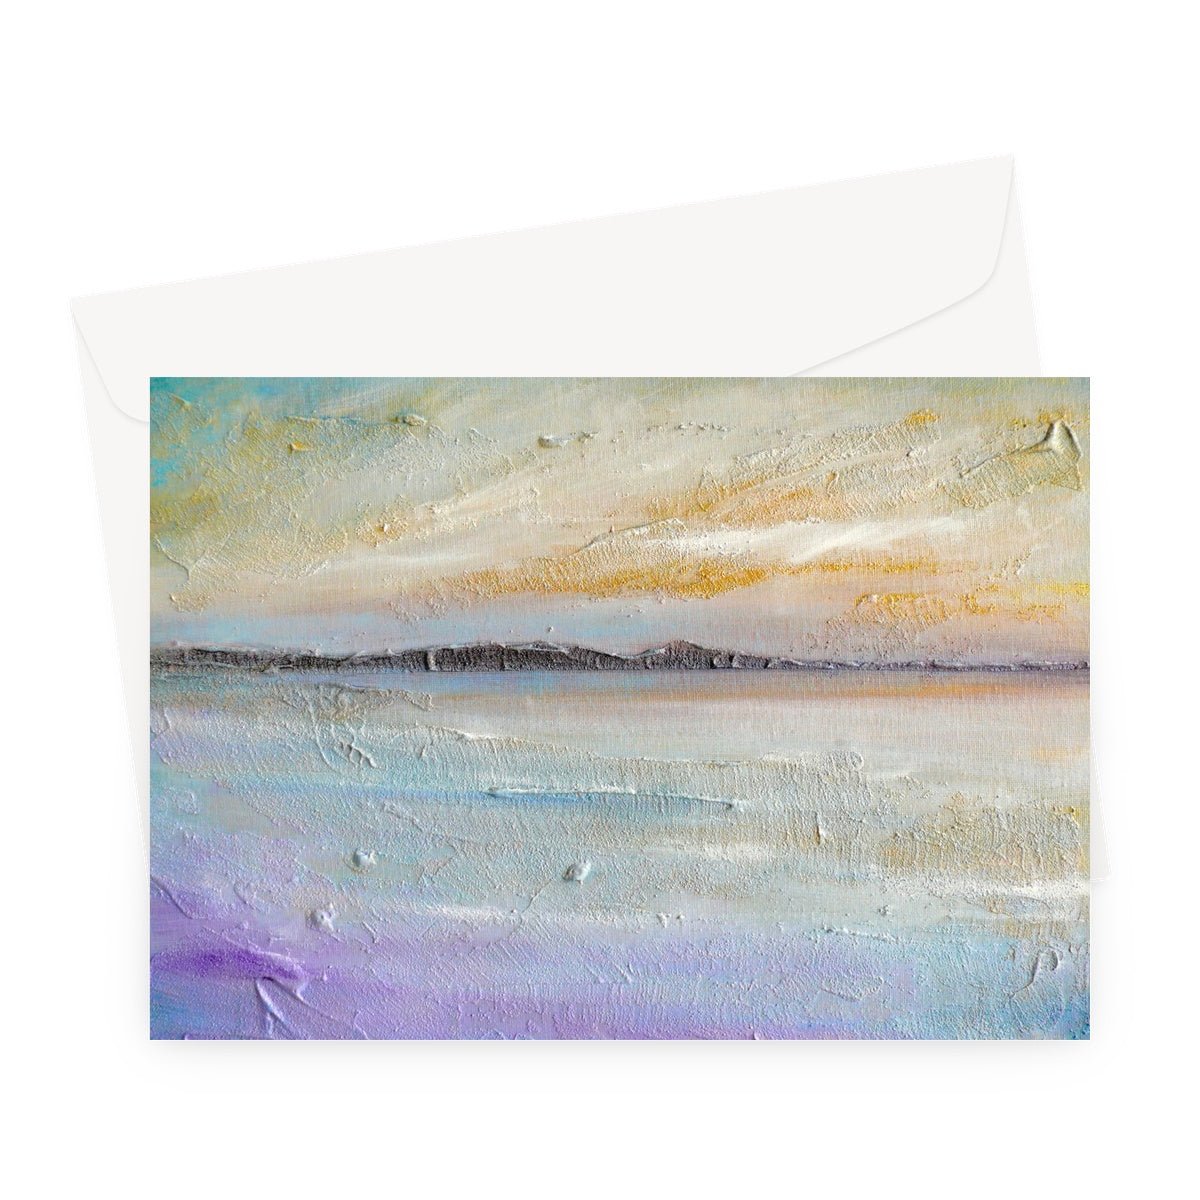 Sollas Beach North Uist Art Gifts Greeting Card-Greetings Cards-Hebridean Islands Art Gallery-A5 Landscape-10 Cards-Paintings, Prints, Homeware, Art Gifts From Scotland By Scottish Artist Kevin Hunter